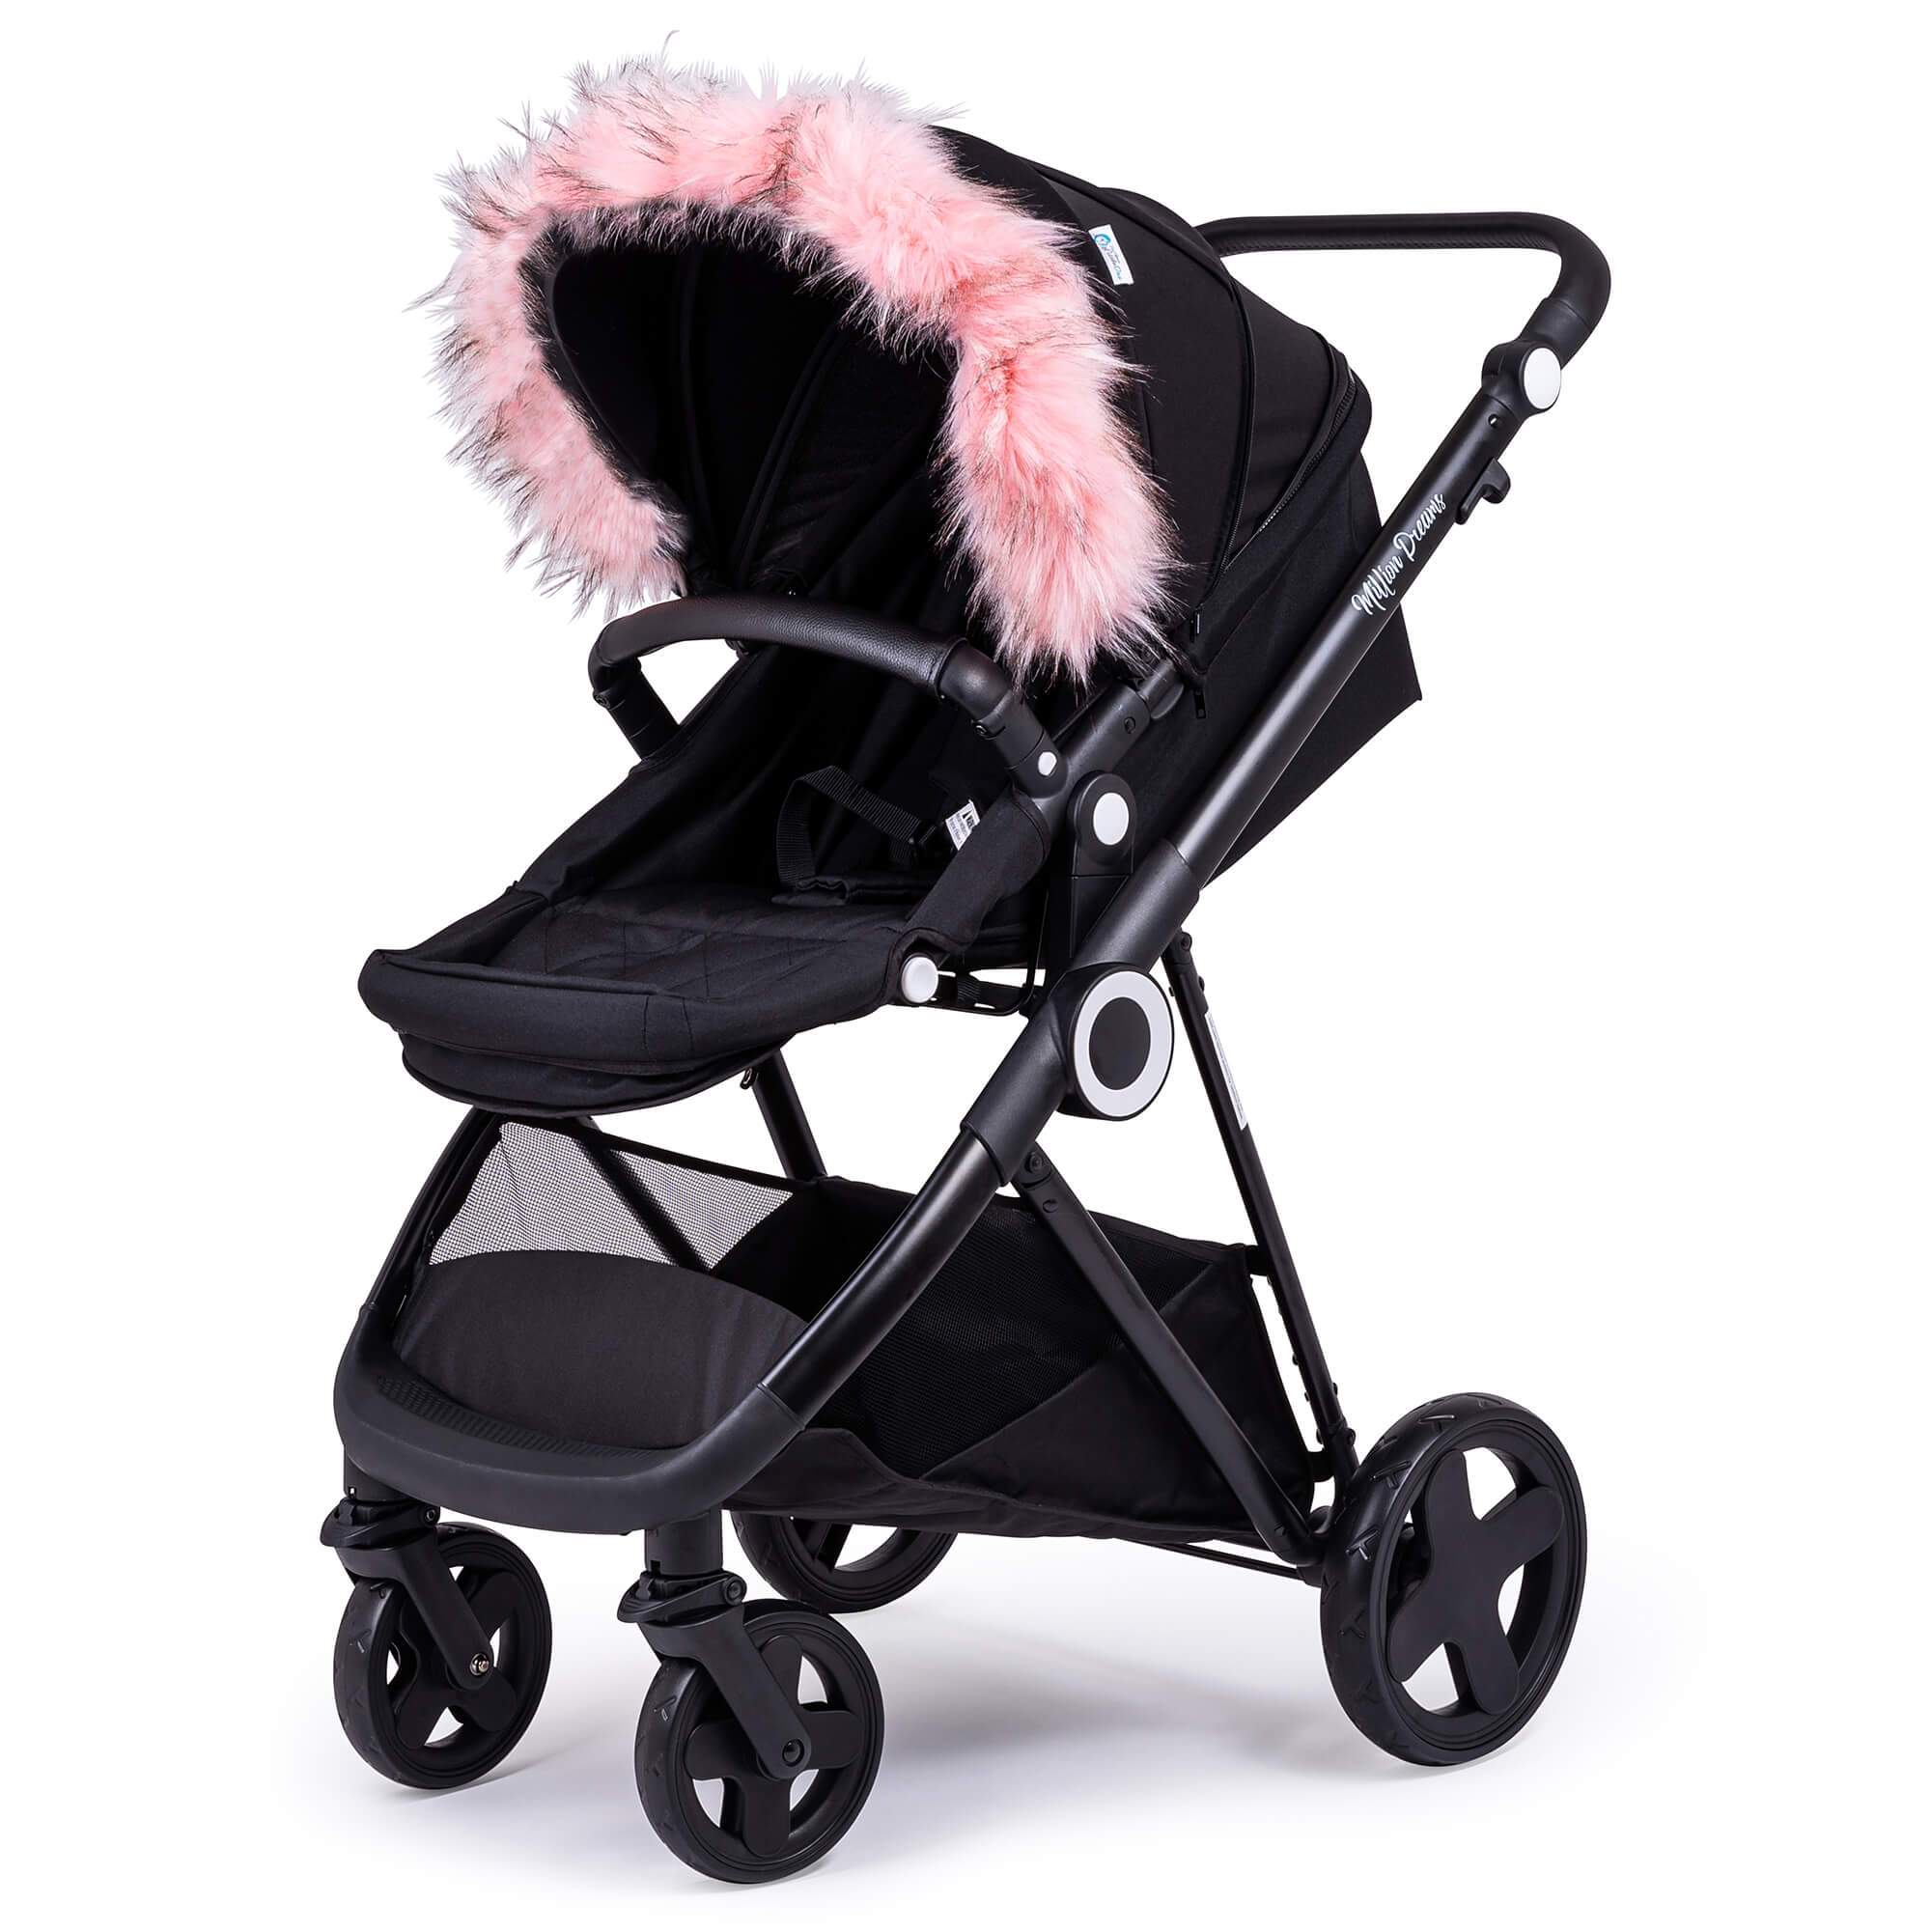 Pram Fur Hood Trim Attachment for Pushchair Compatible with Koelstra - Light Pink / Fits All Models | For Your Little One